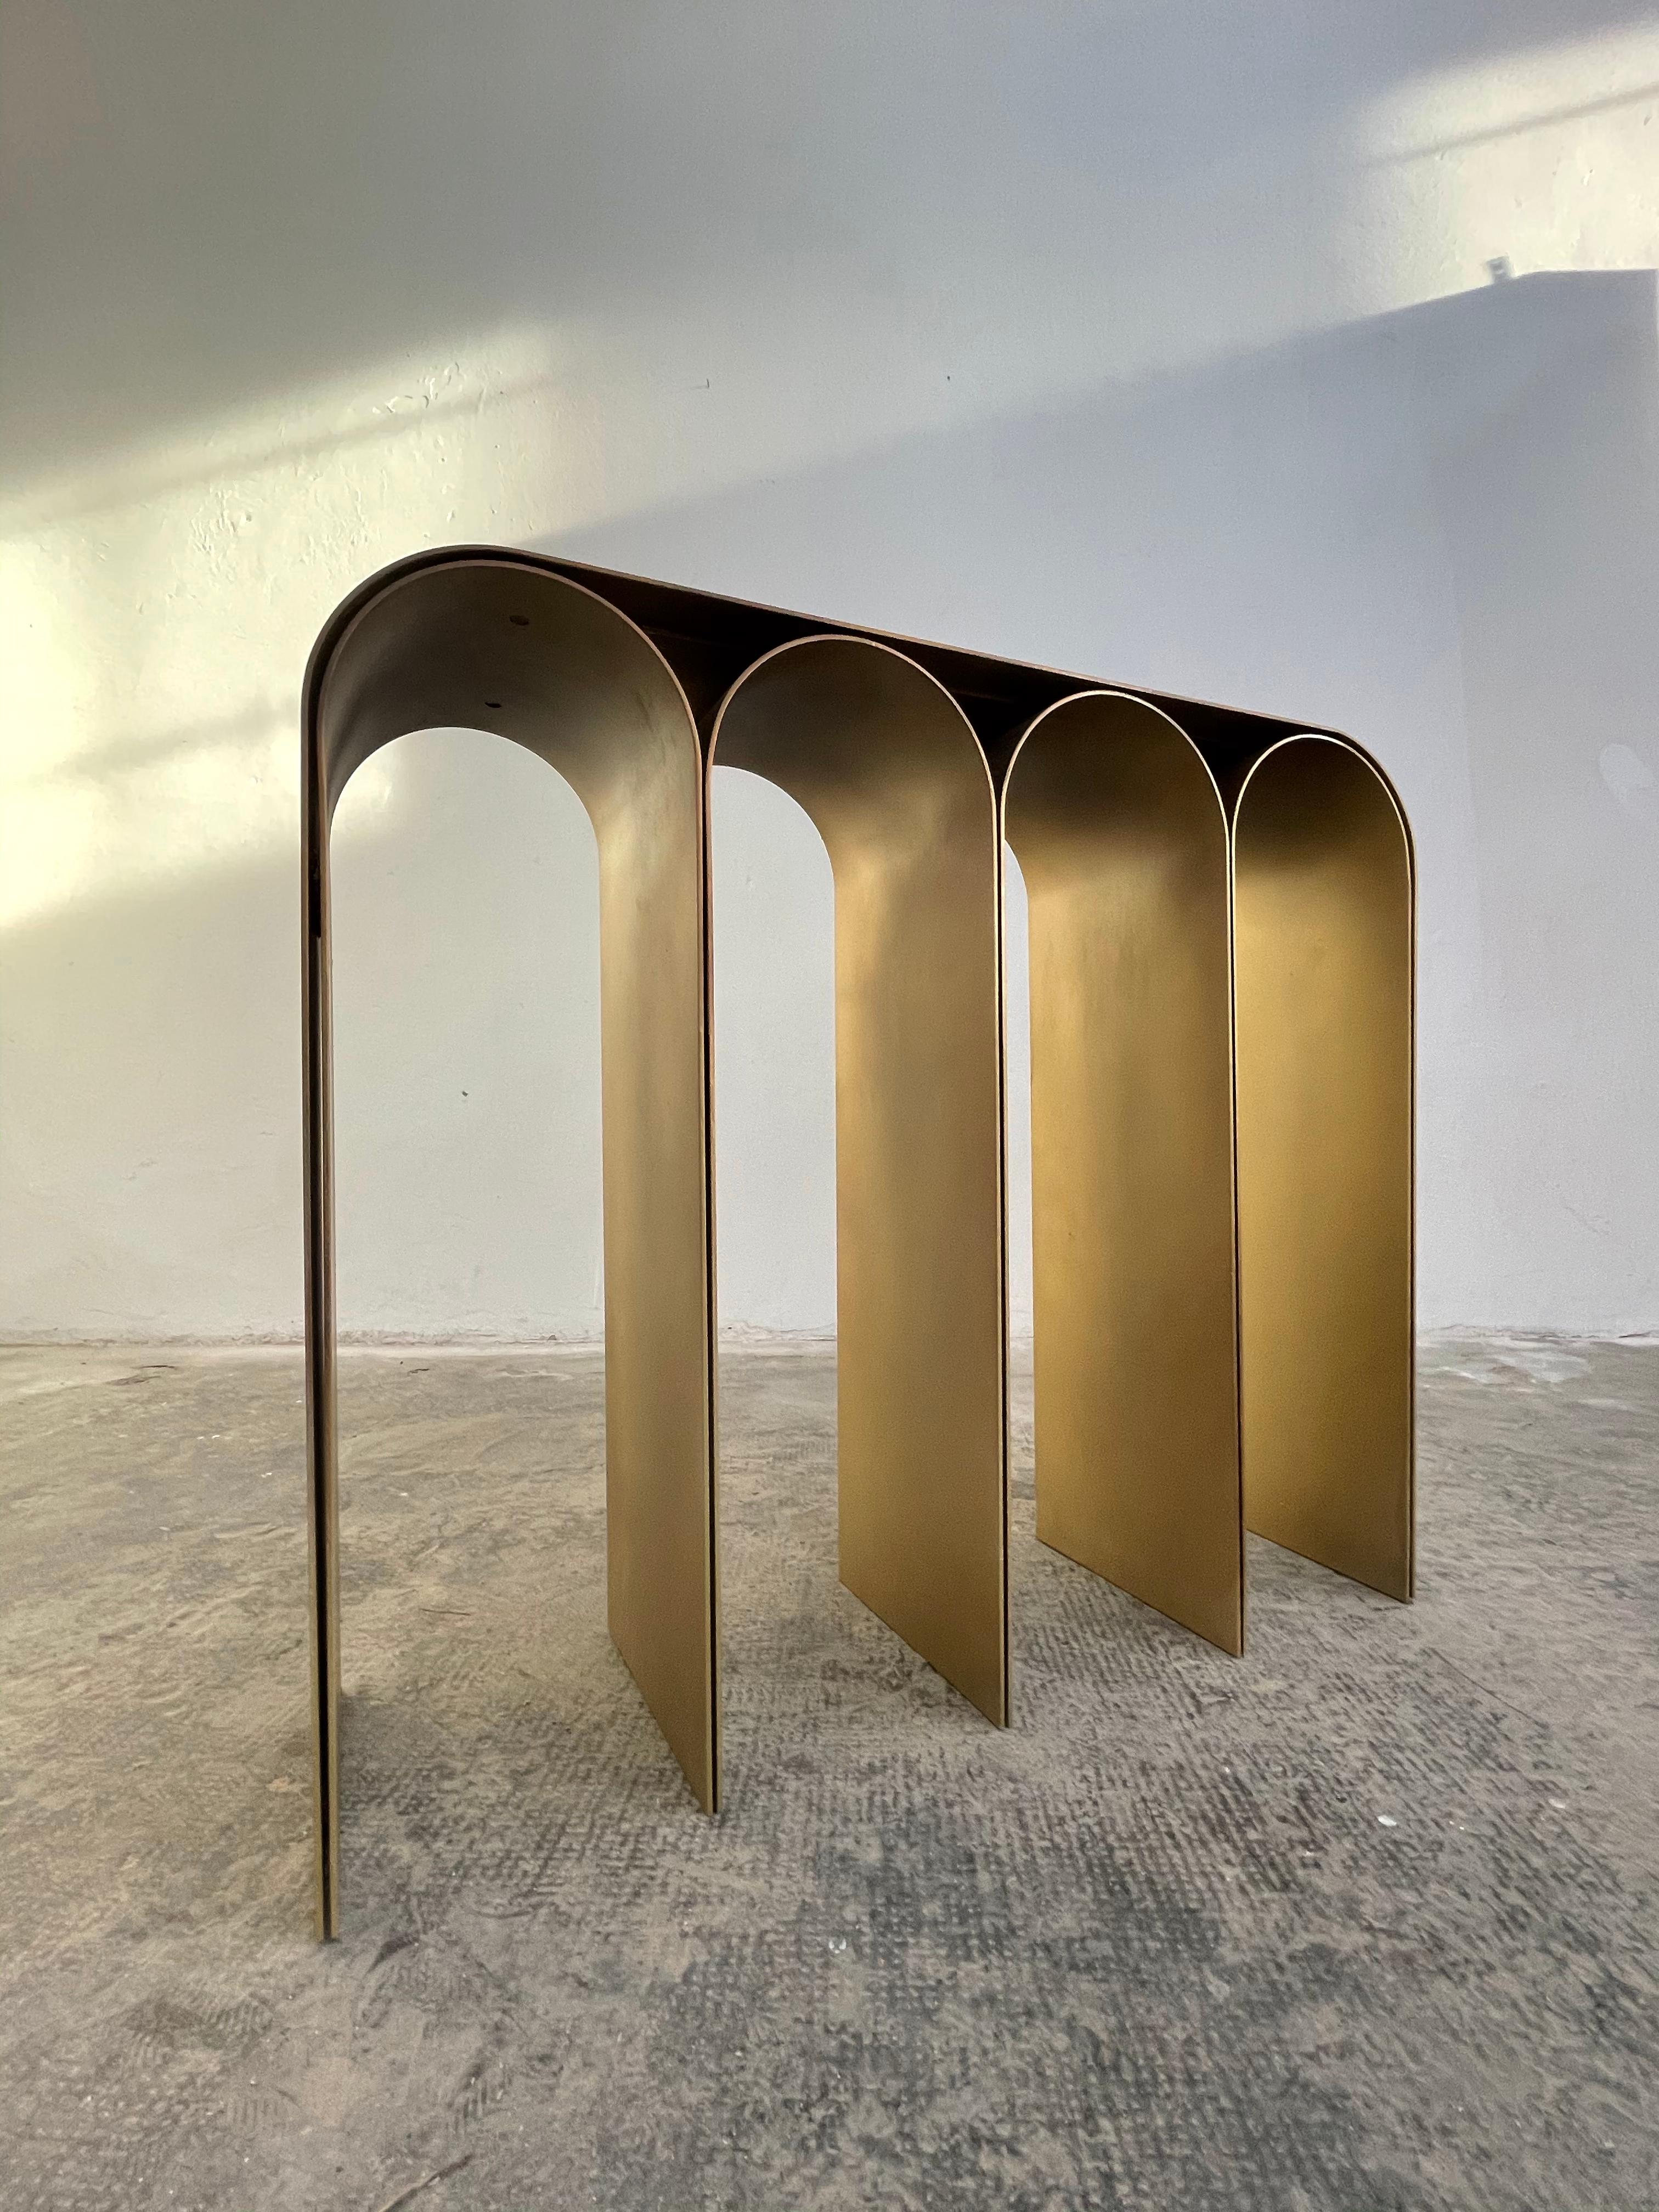 Gold arch console by Pietro Franceschini
Sold exclusively by Galerie Philia
Manufacturer: Prinzivalli
Dimensions: W 103 x L 30 x H 86 cm
Materials: Steel (brass finish)
Other finishes: Satin, blackened, polished mirror

Also available:
Steel